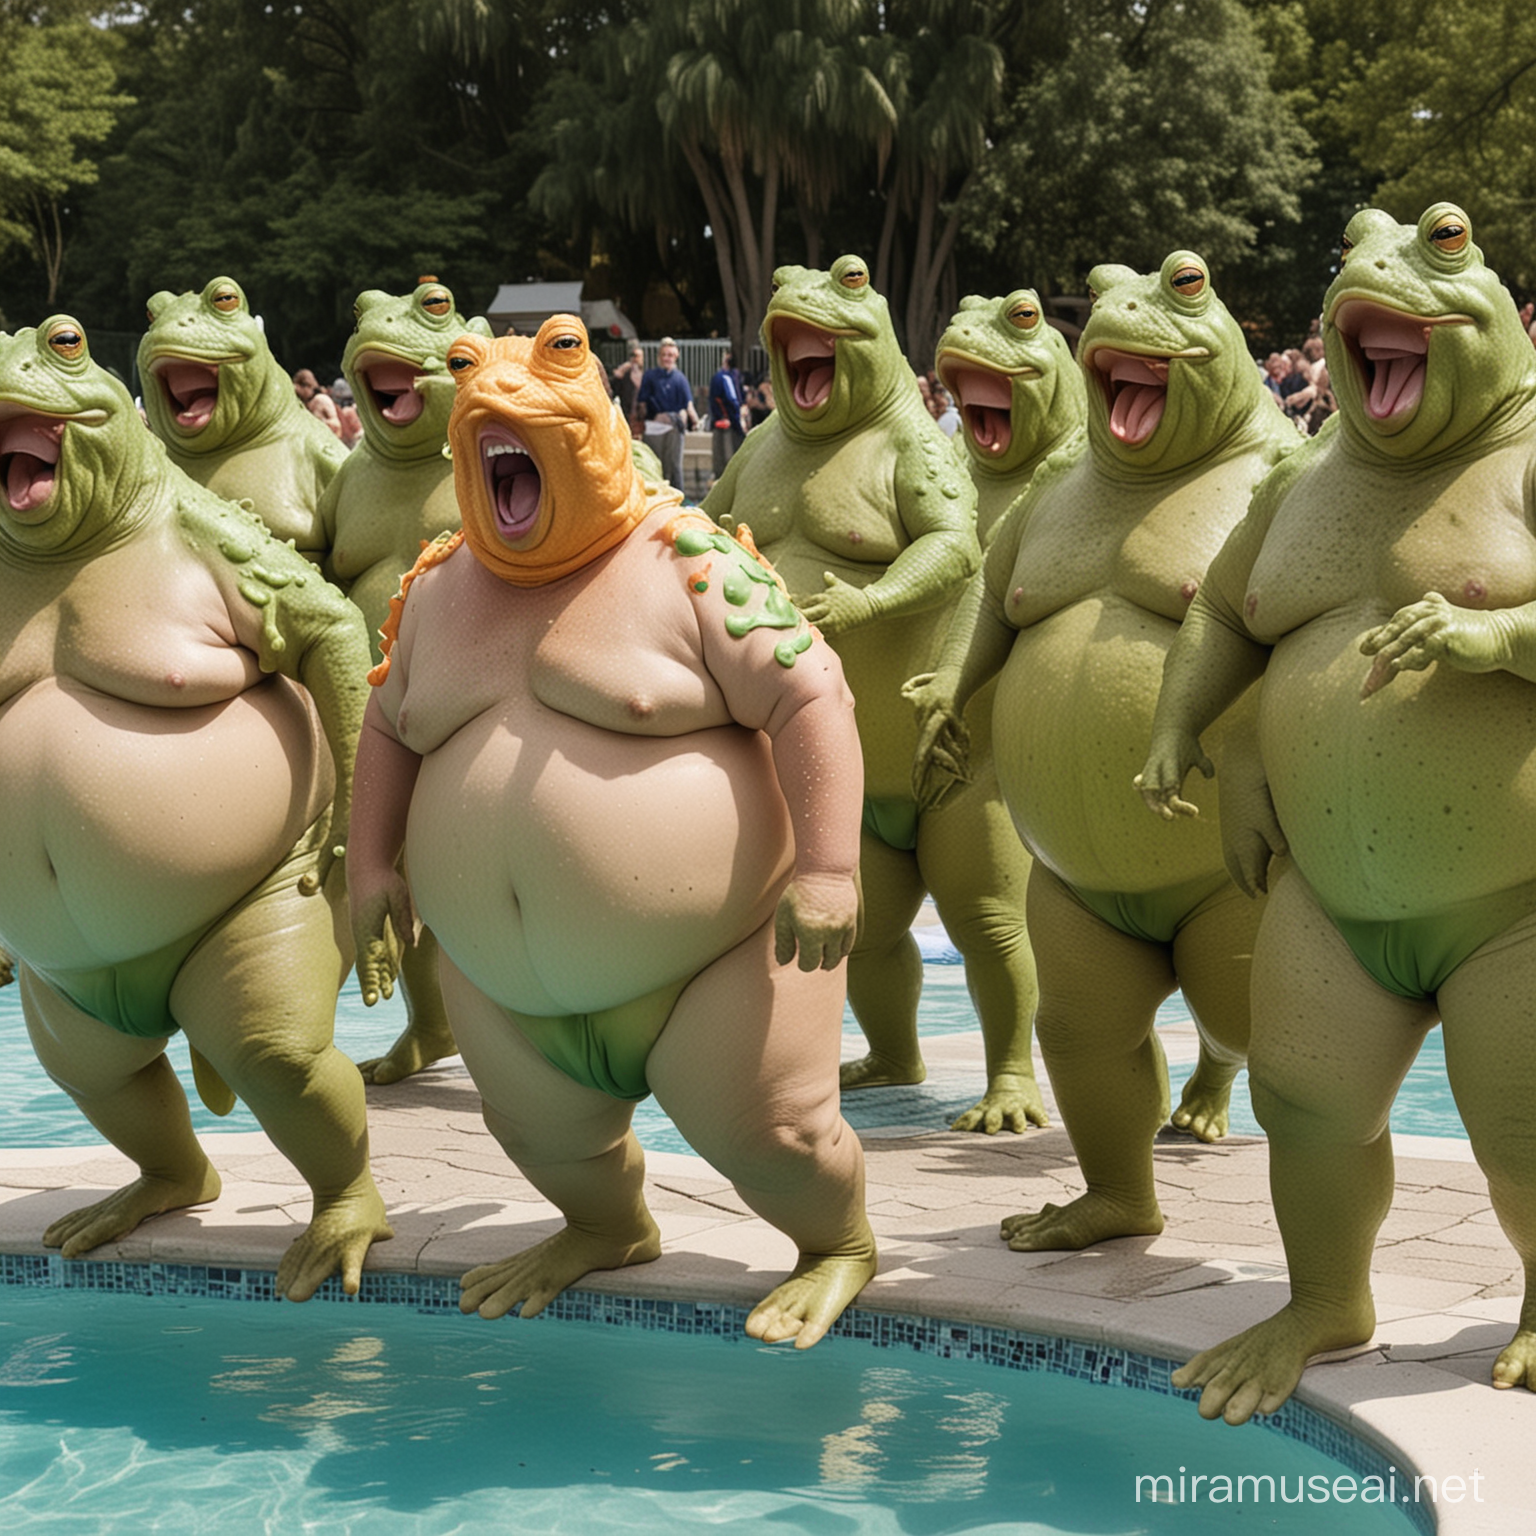 Chubby Men Frogging into Angry Donald Trumps Pool